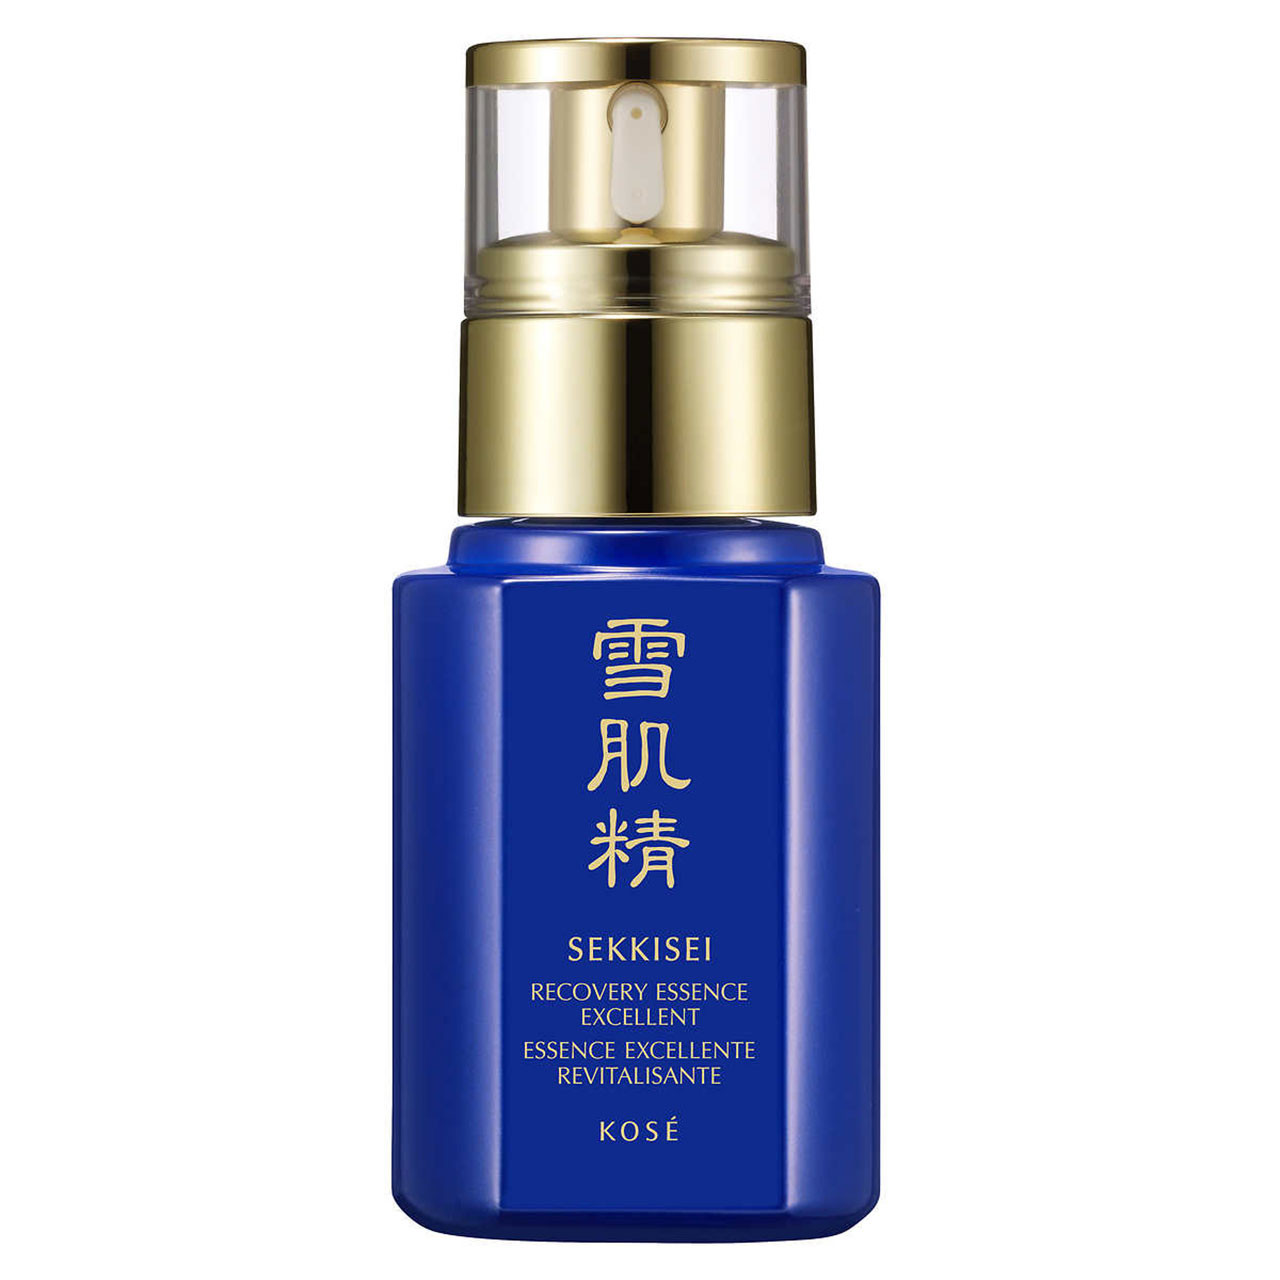 SEKKISEI Recovery Essence Excellent - 1.7 oz